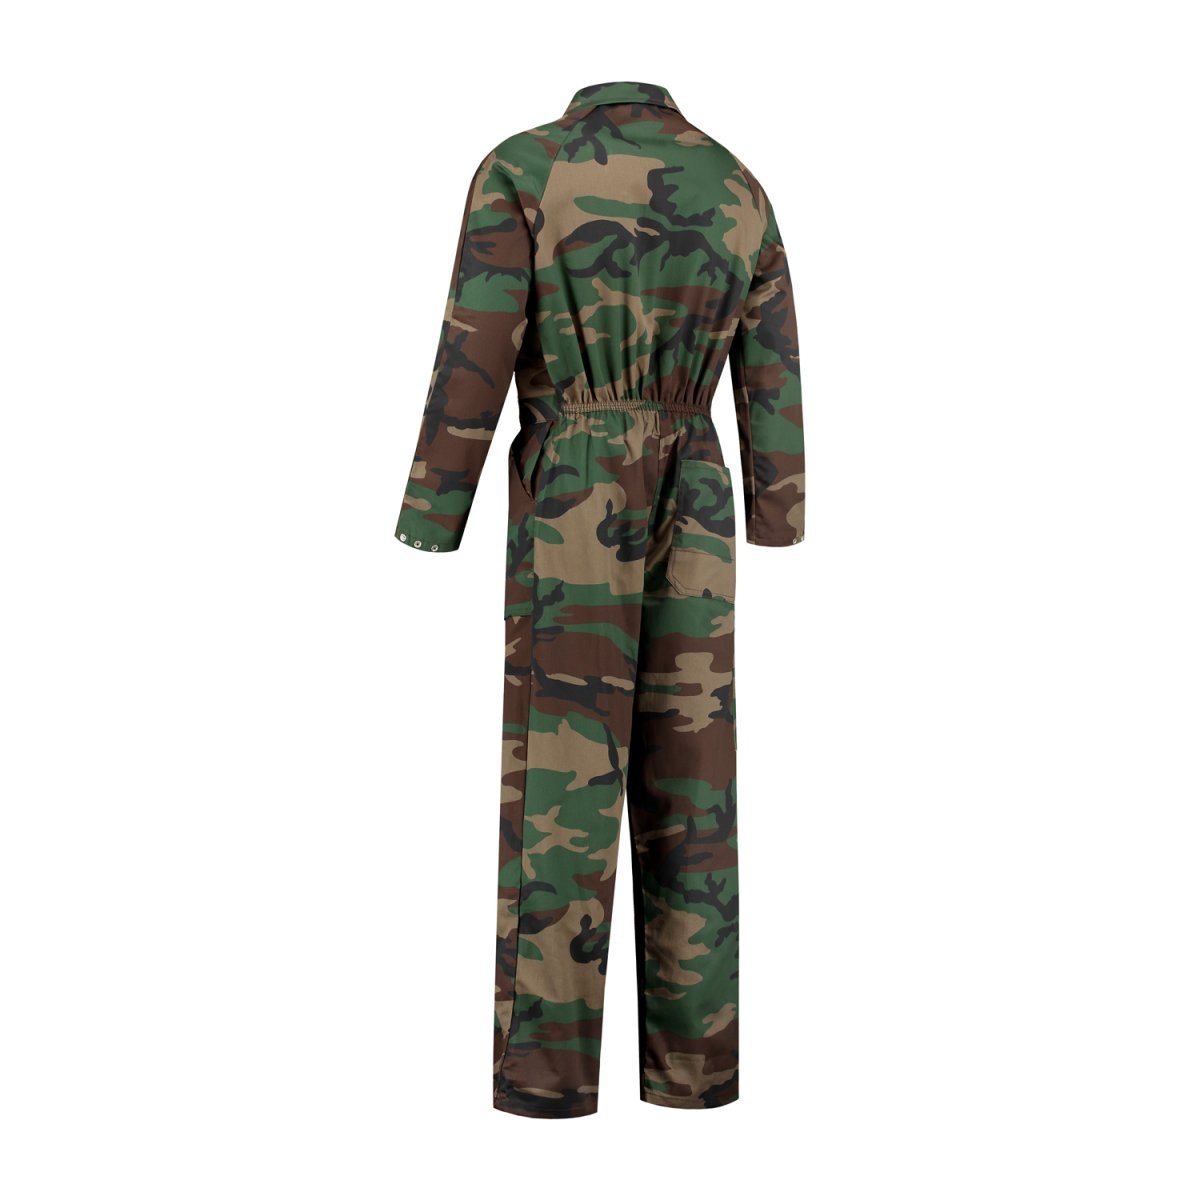 SSP-Overall, 260g/m, camouflage